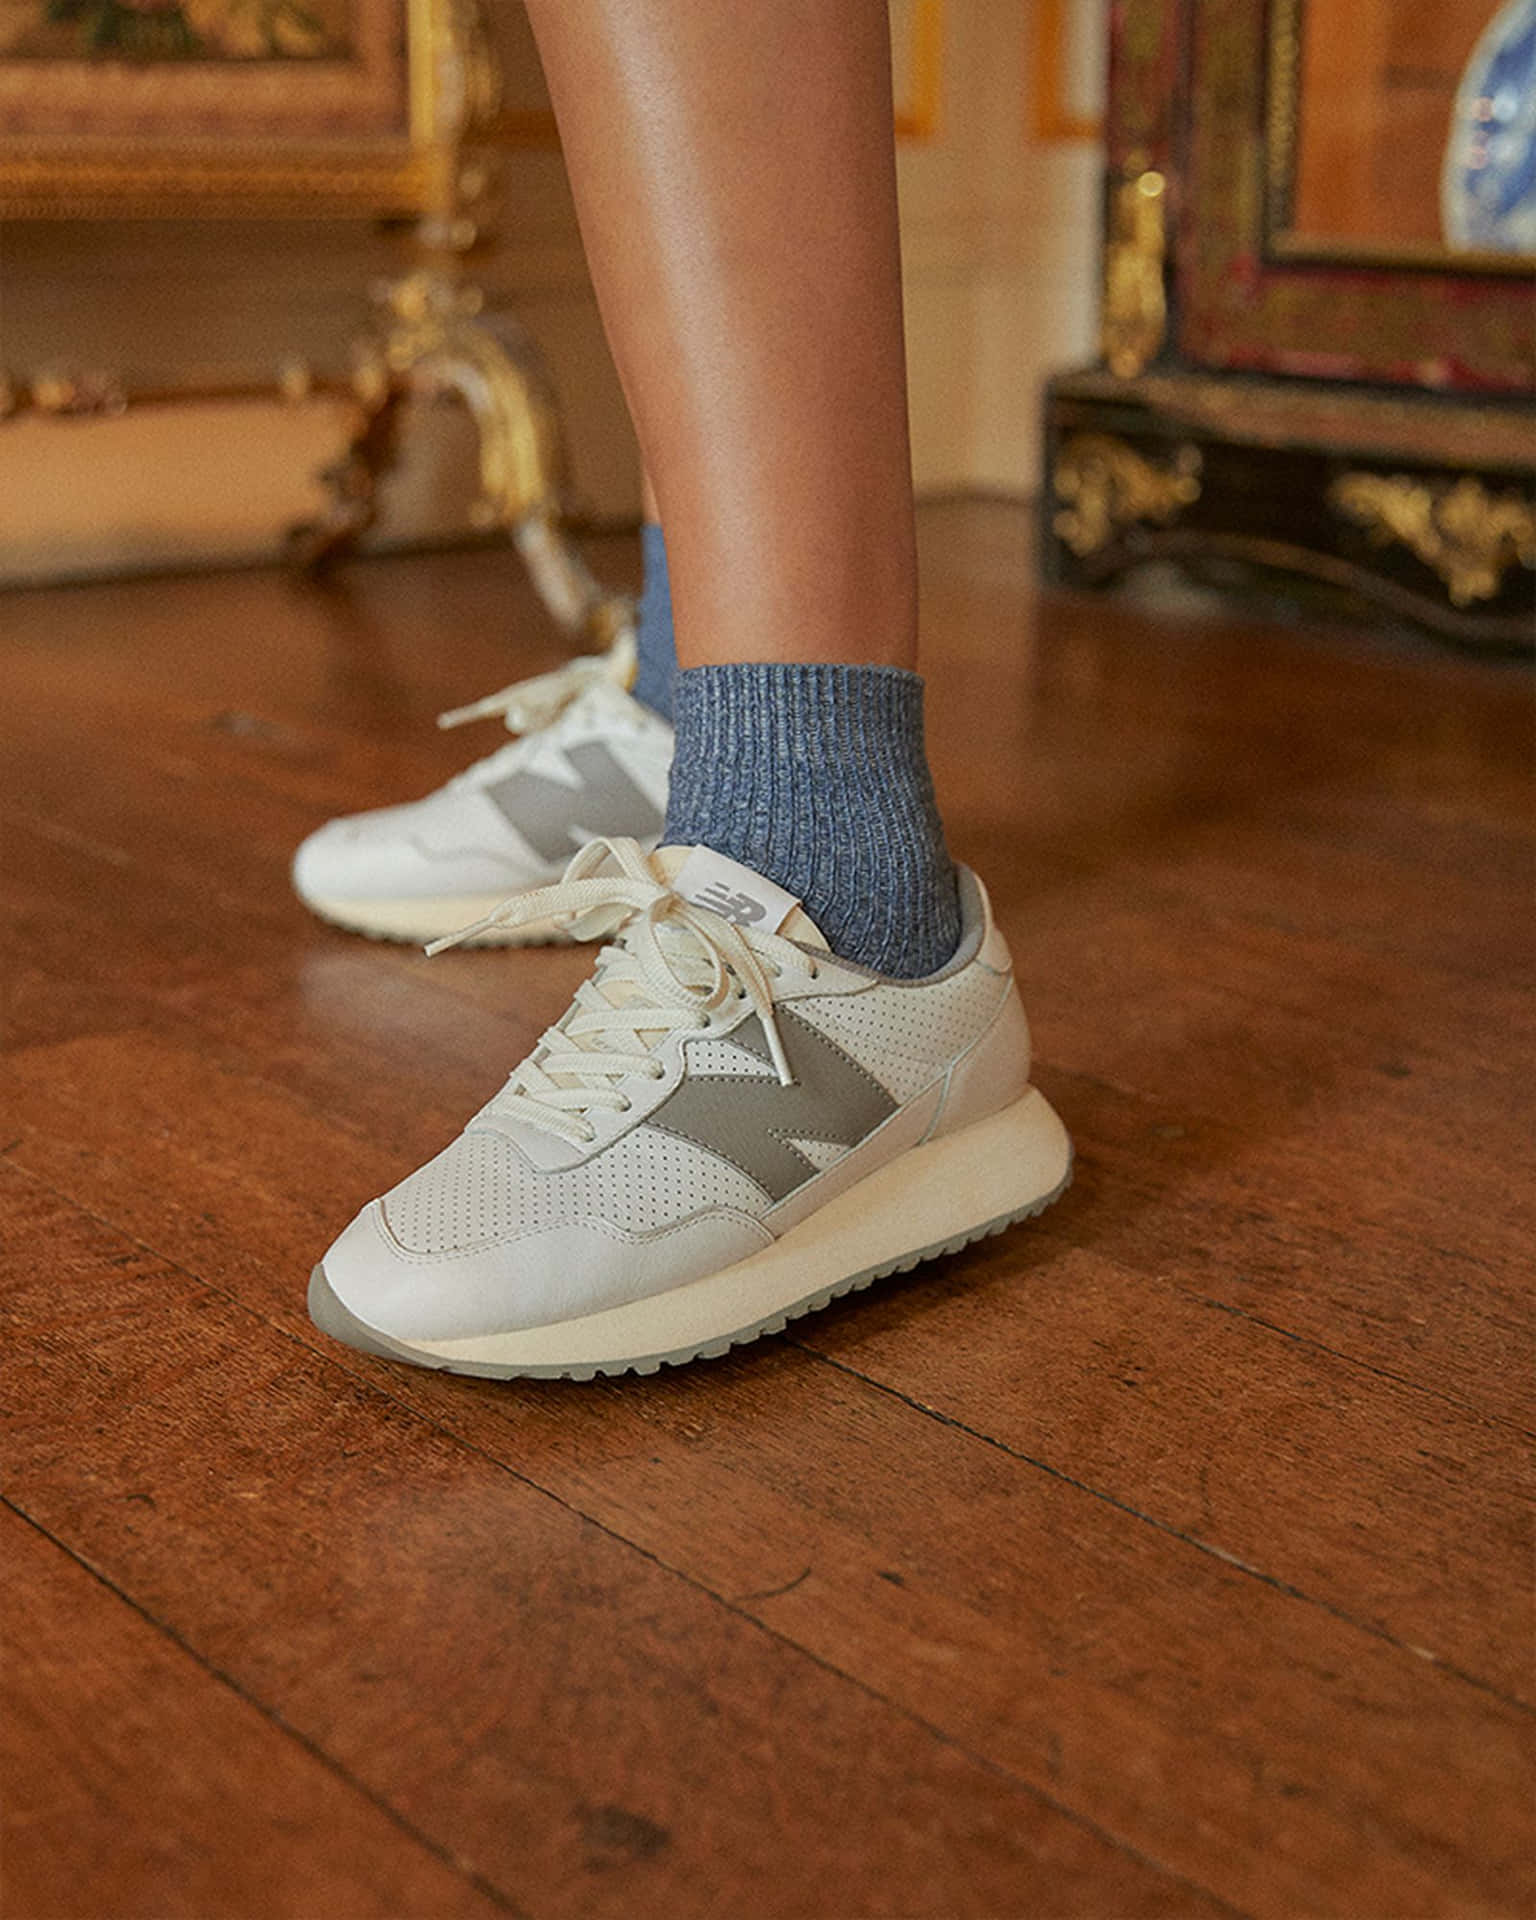 A Woman Wearing A White And Grey Sneaker